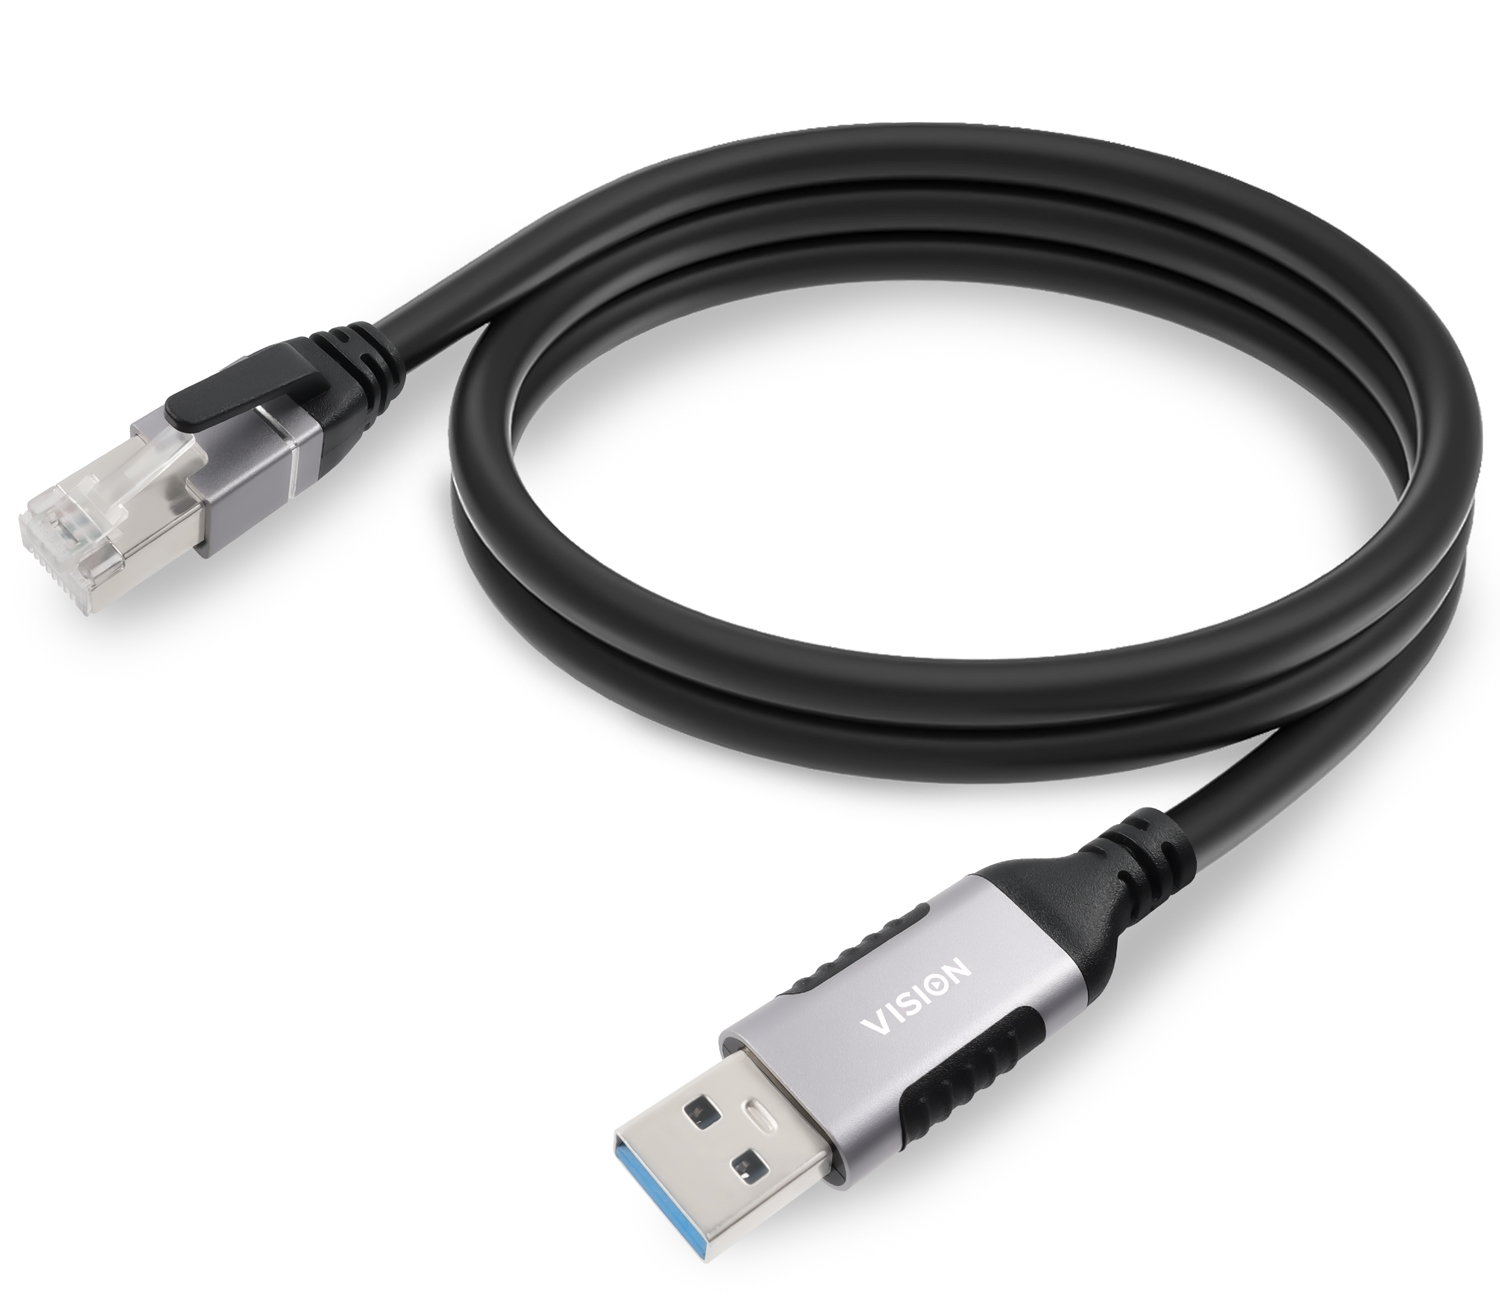 An image showing Black USB to RJ45 Ethernet Cable 2m